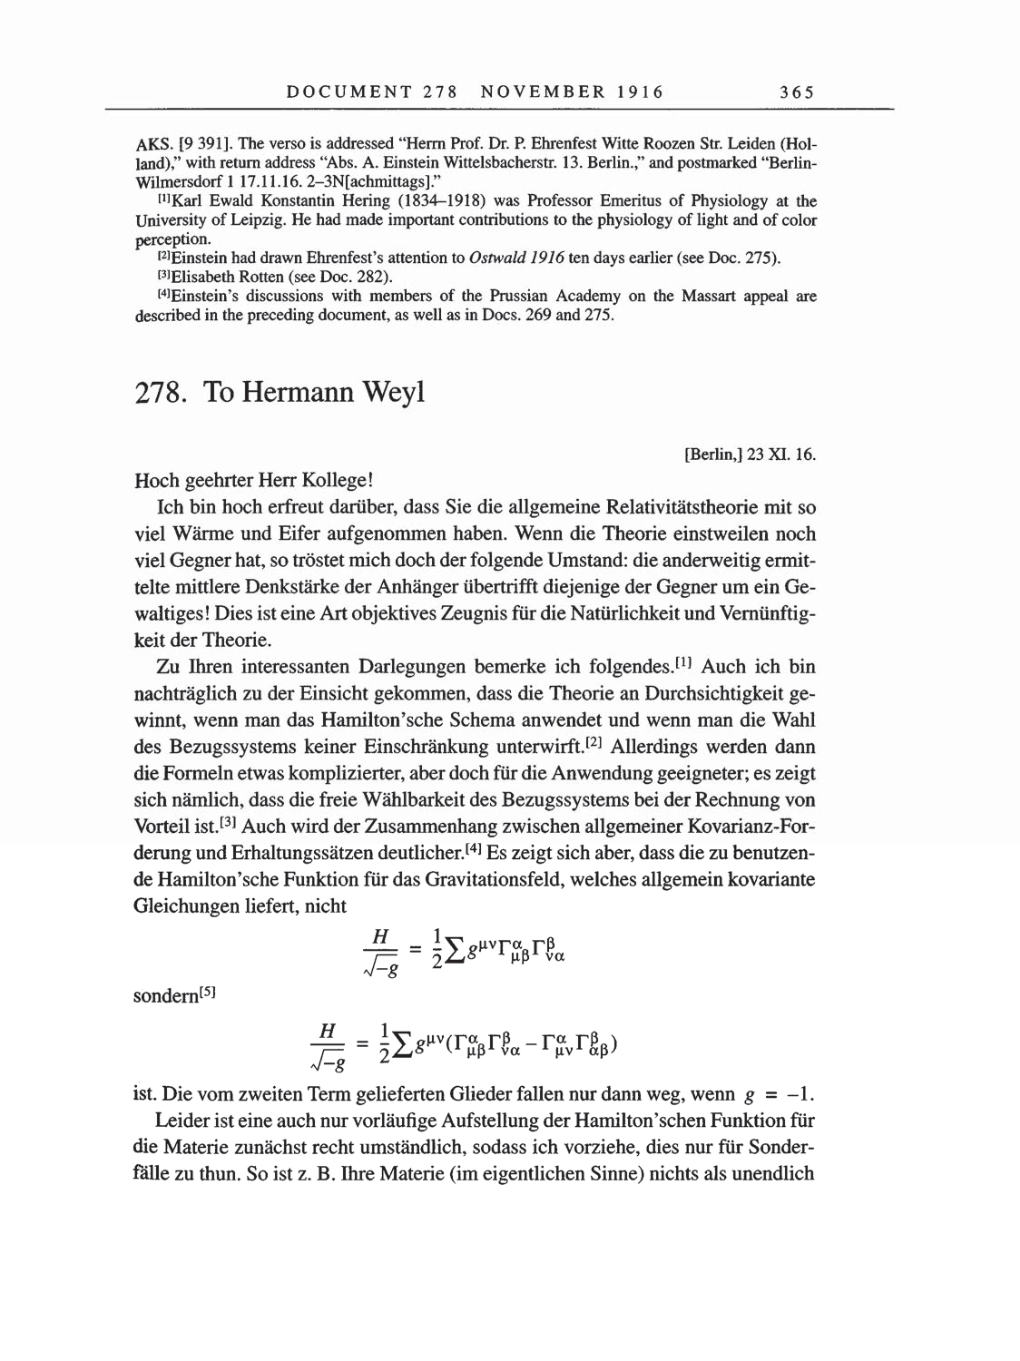 Volume 8, Part A: The Berlin Years: Correspondence 1914-1917 page 365